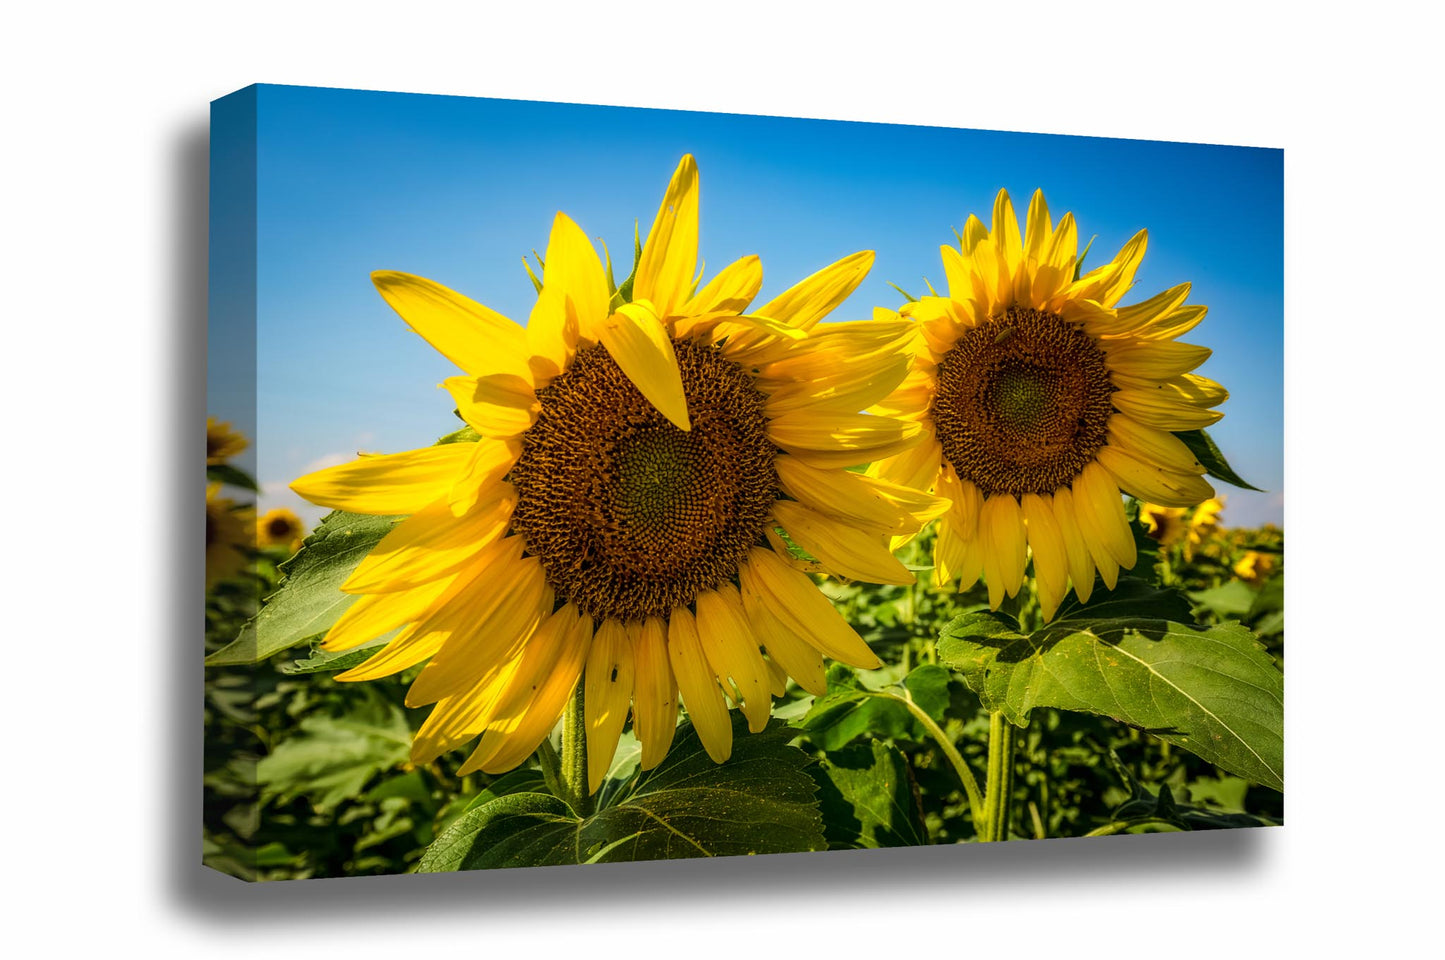 Country canvas wall art of a pair of large sunflowers shining bright on a warm autumn day in Kansas by Sean Ramsey of Southern Plains Photography.